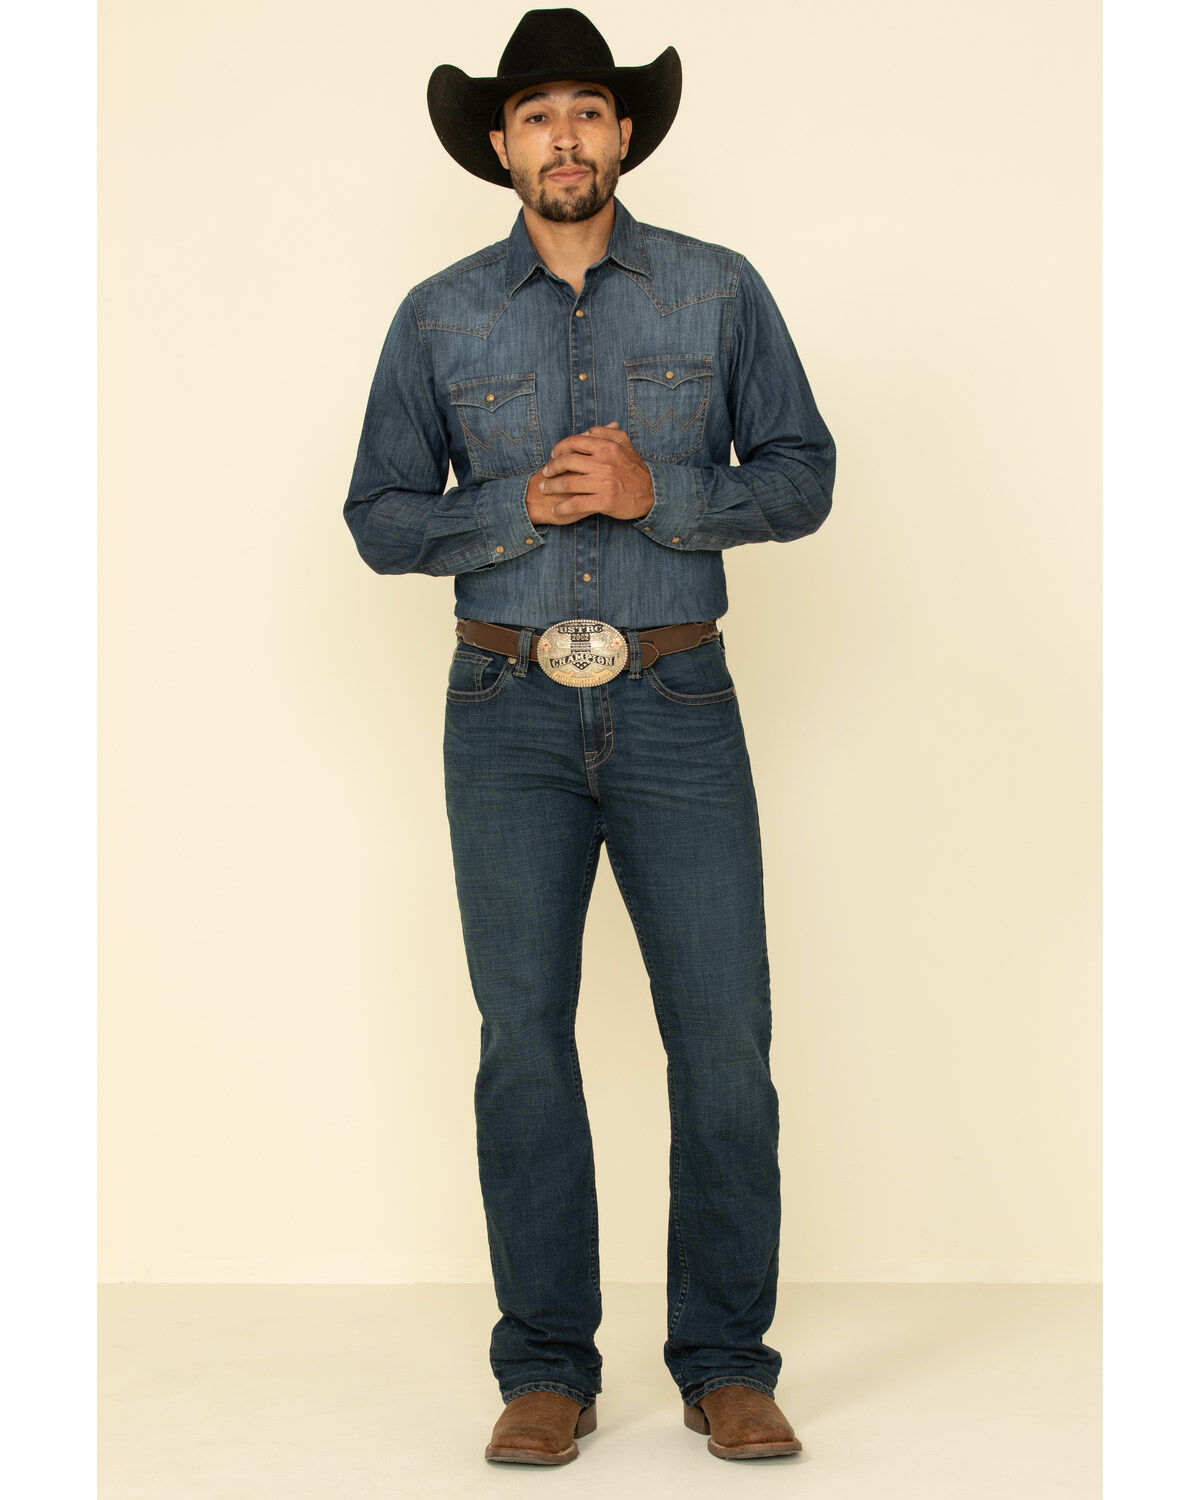 country and western clothing stores near me